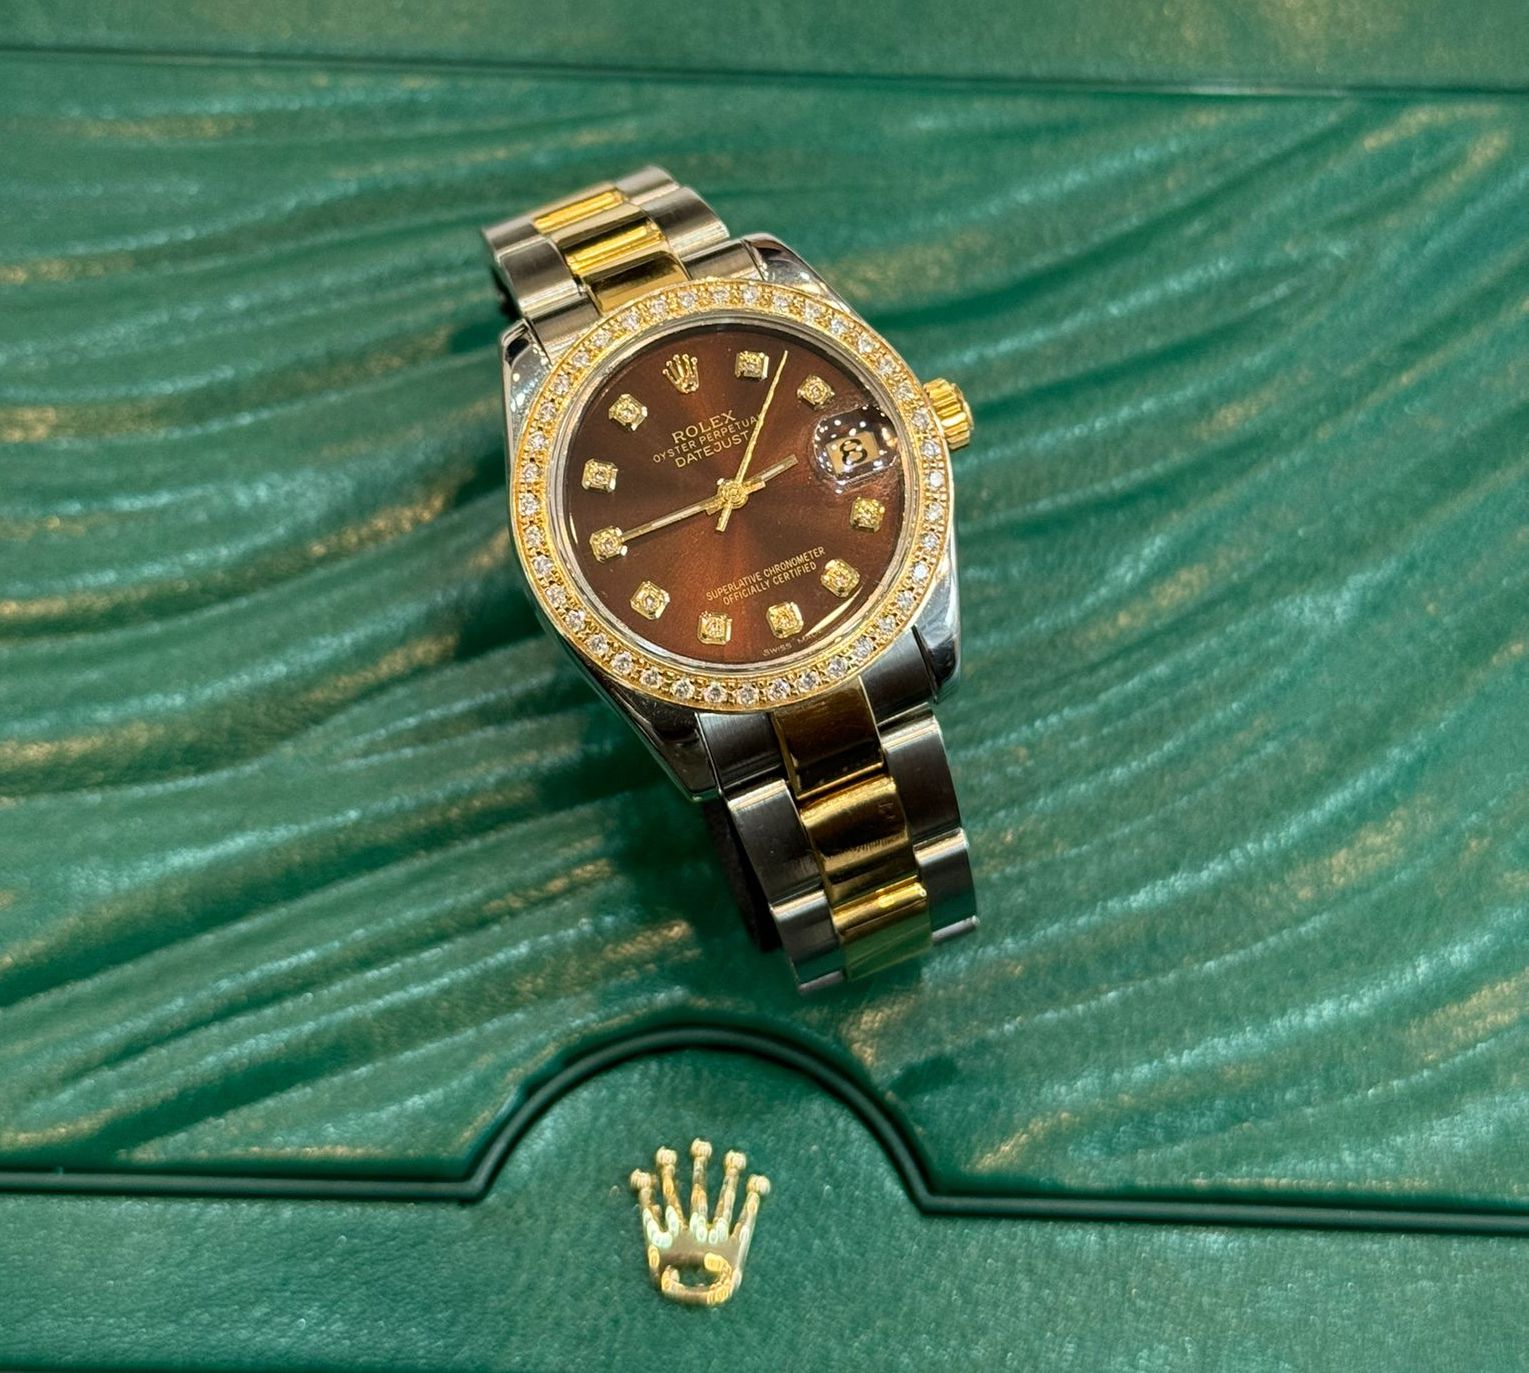 ROLEX DATEJUST 31 - GOLD & STEEL (REF. 178273) BOX & PAPERS - DIAMOND DIAL & BEZEL - Image 4 of 8